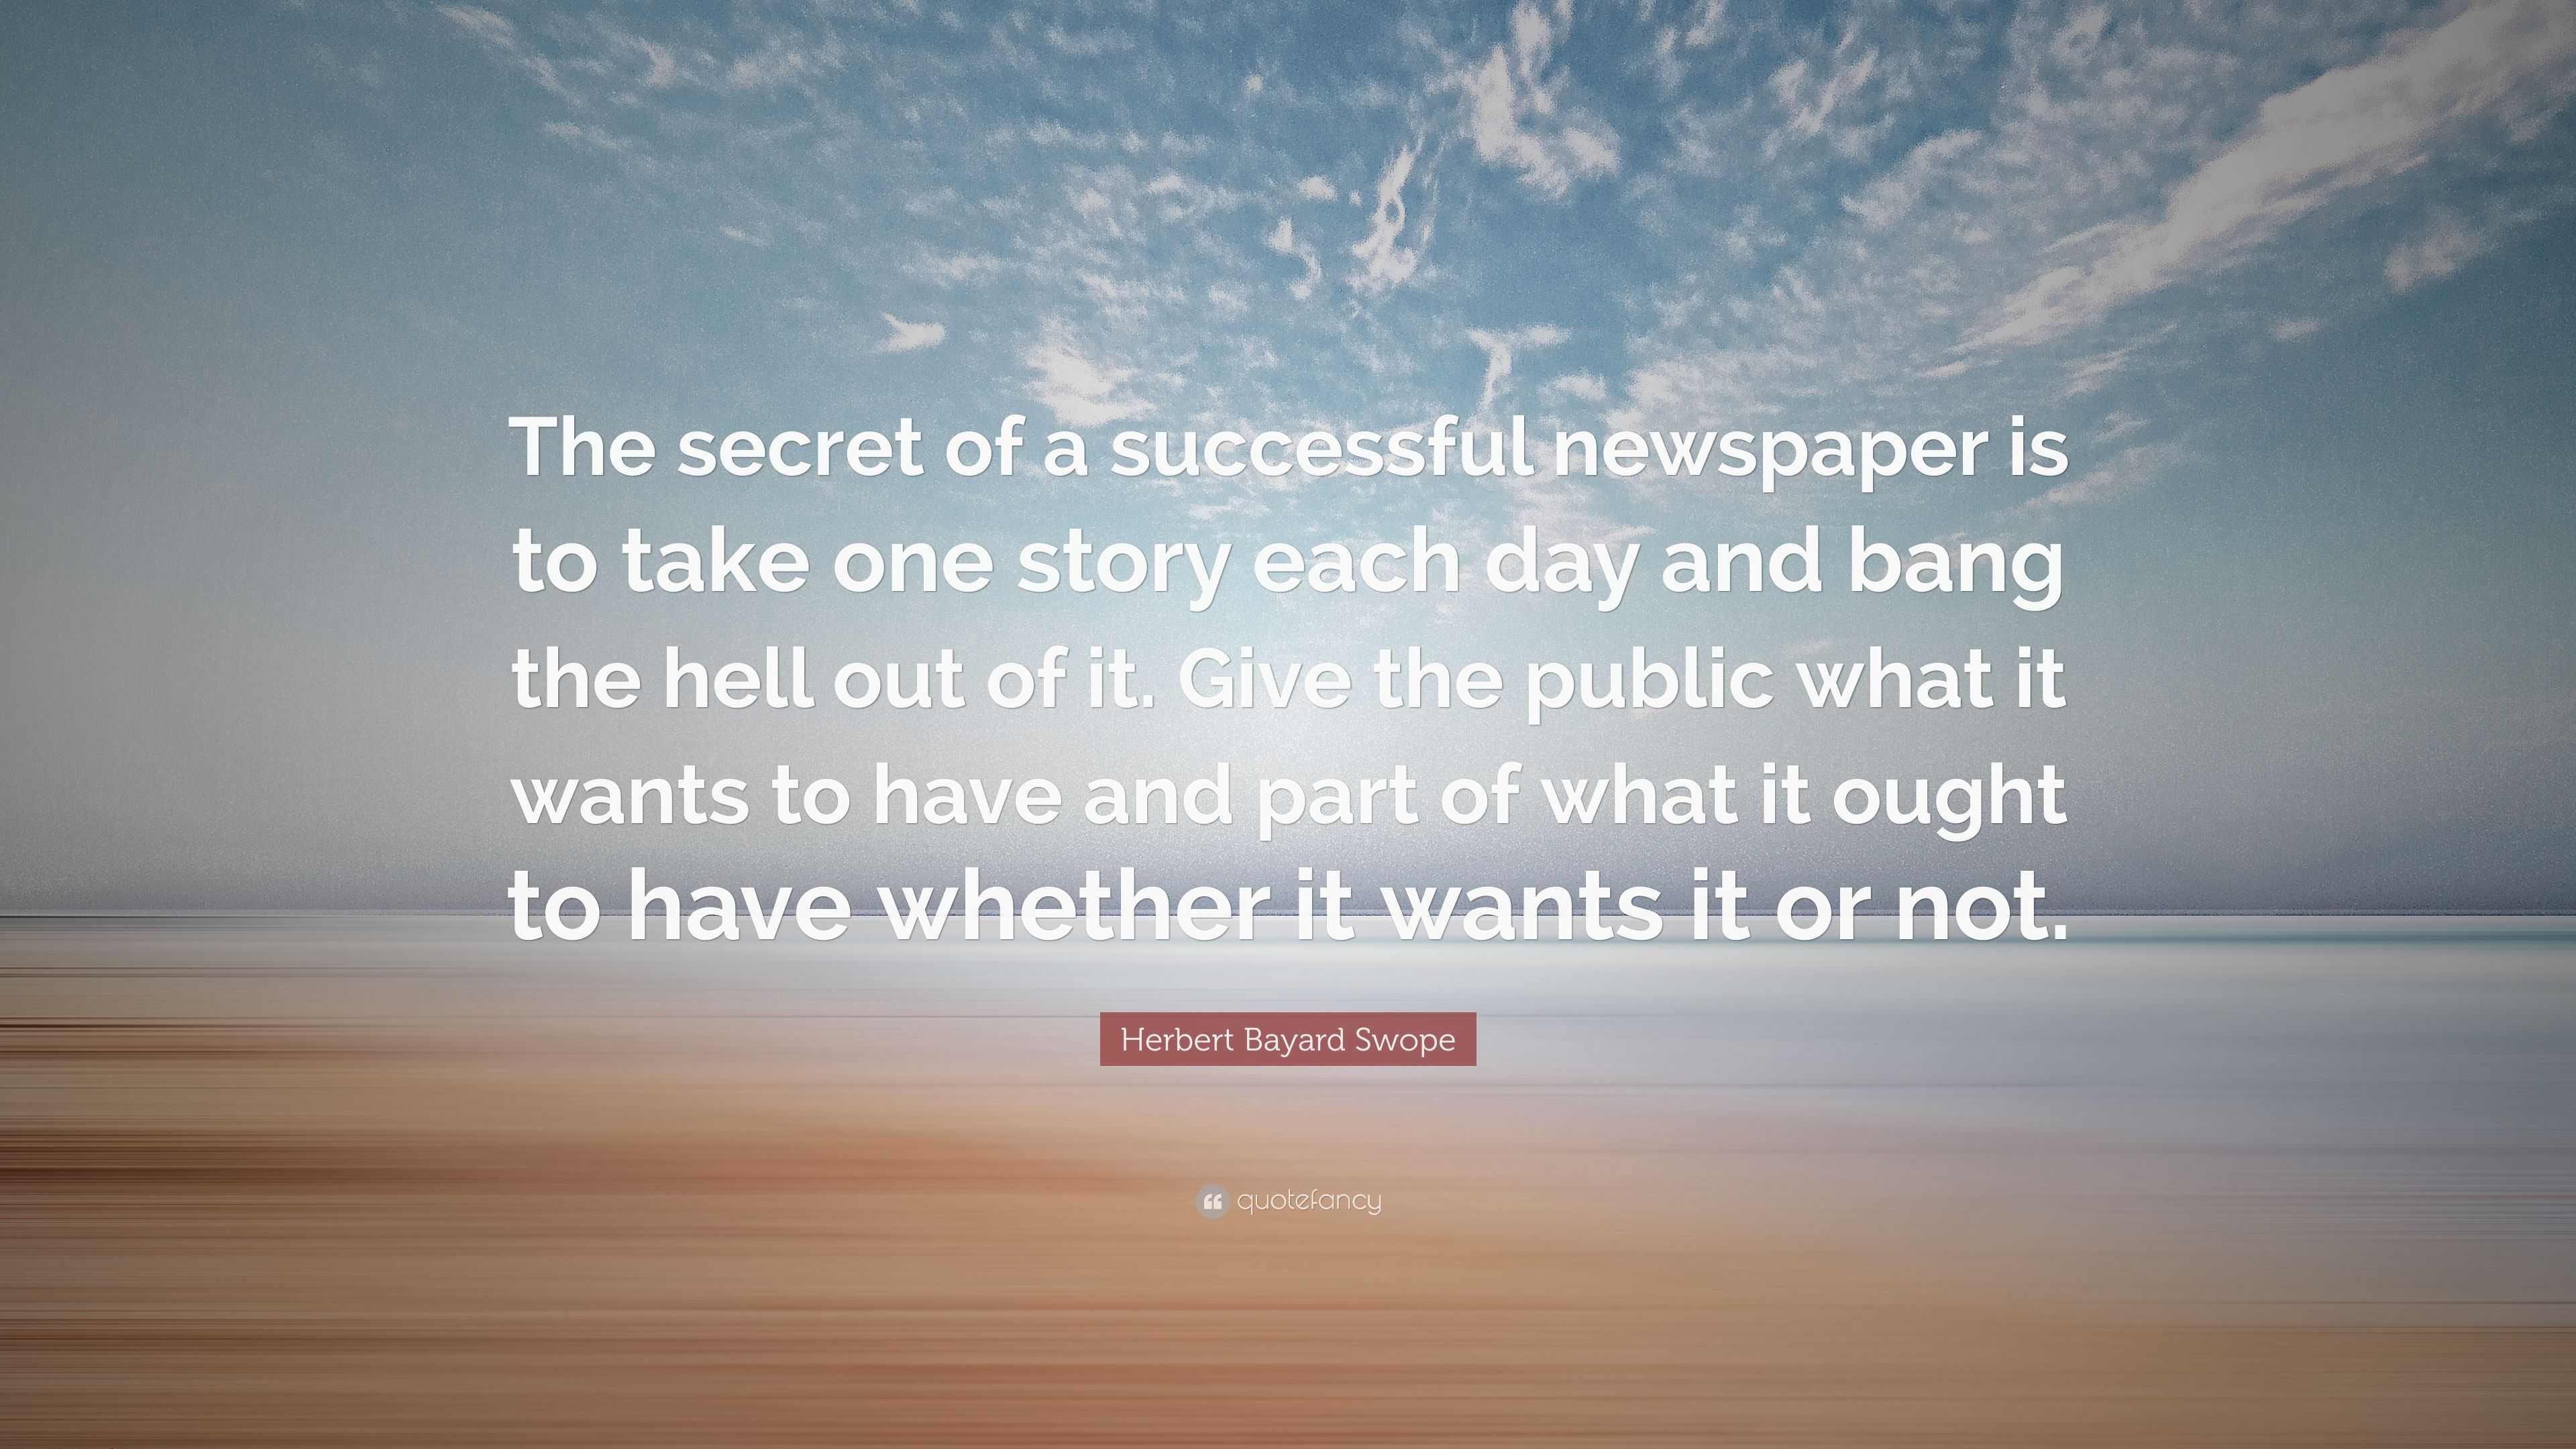 Herbert Bayard Swope Quote: “The secret of a successful newspaper is to ...